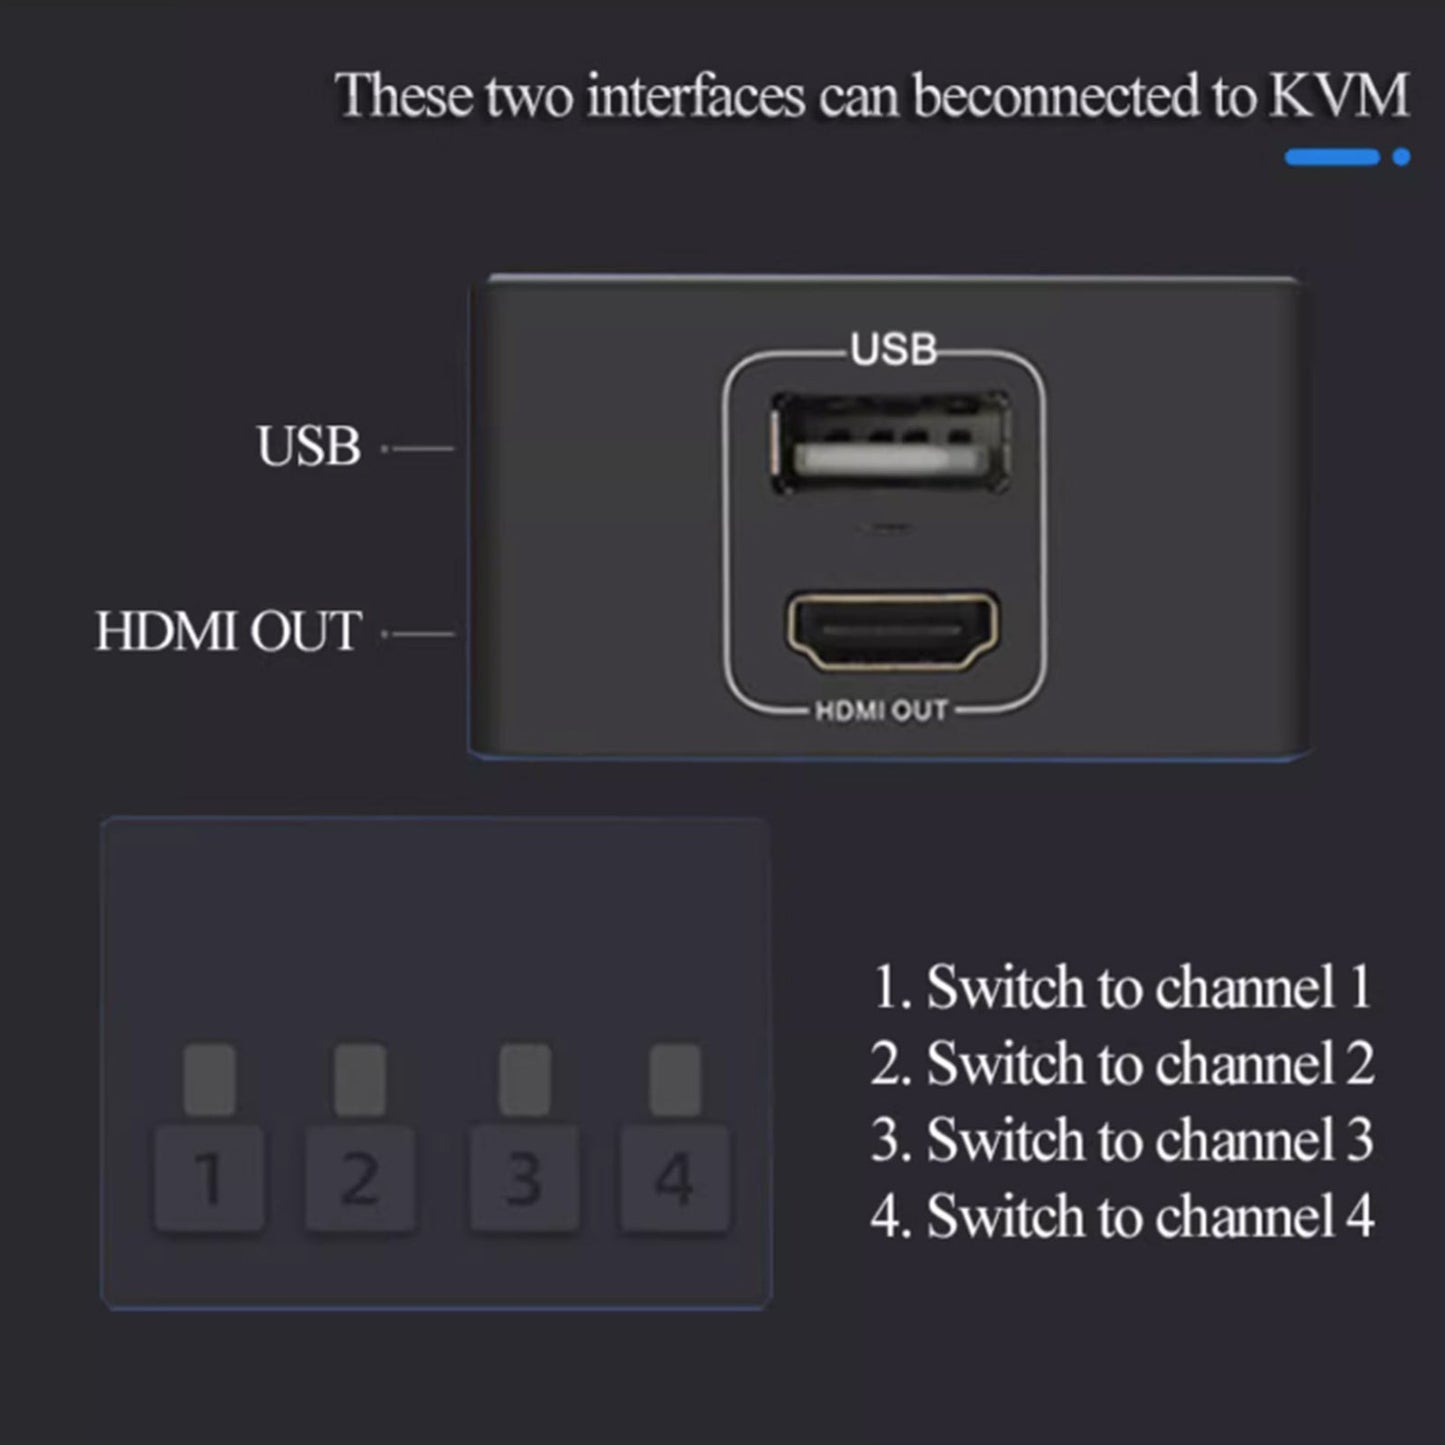 HDMI KVM Switch four-to-one Channel Converter Supports BLKVM PIKVM